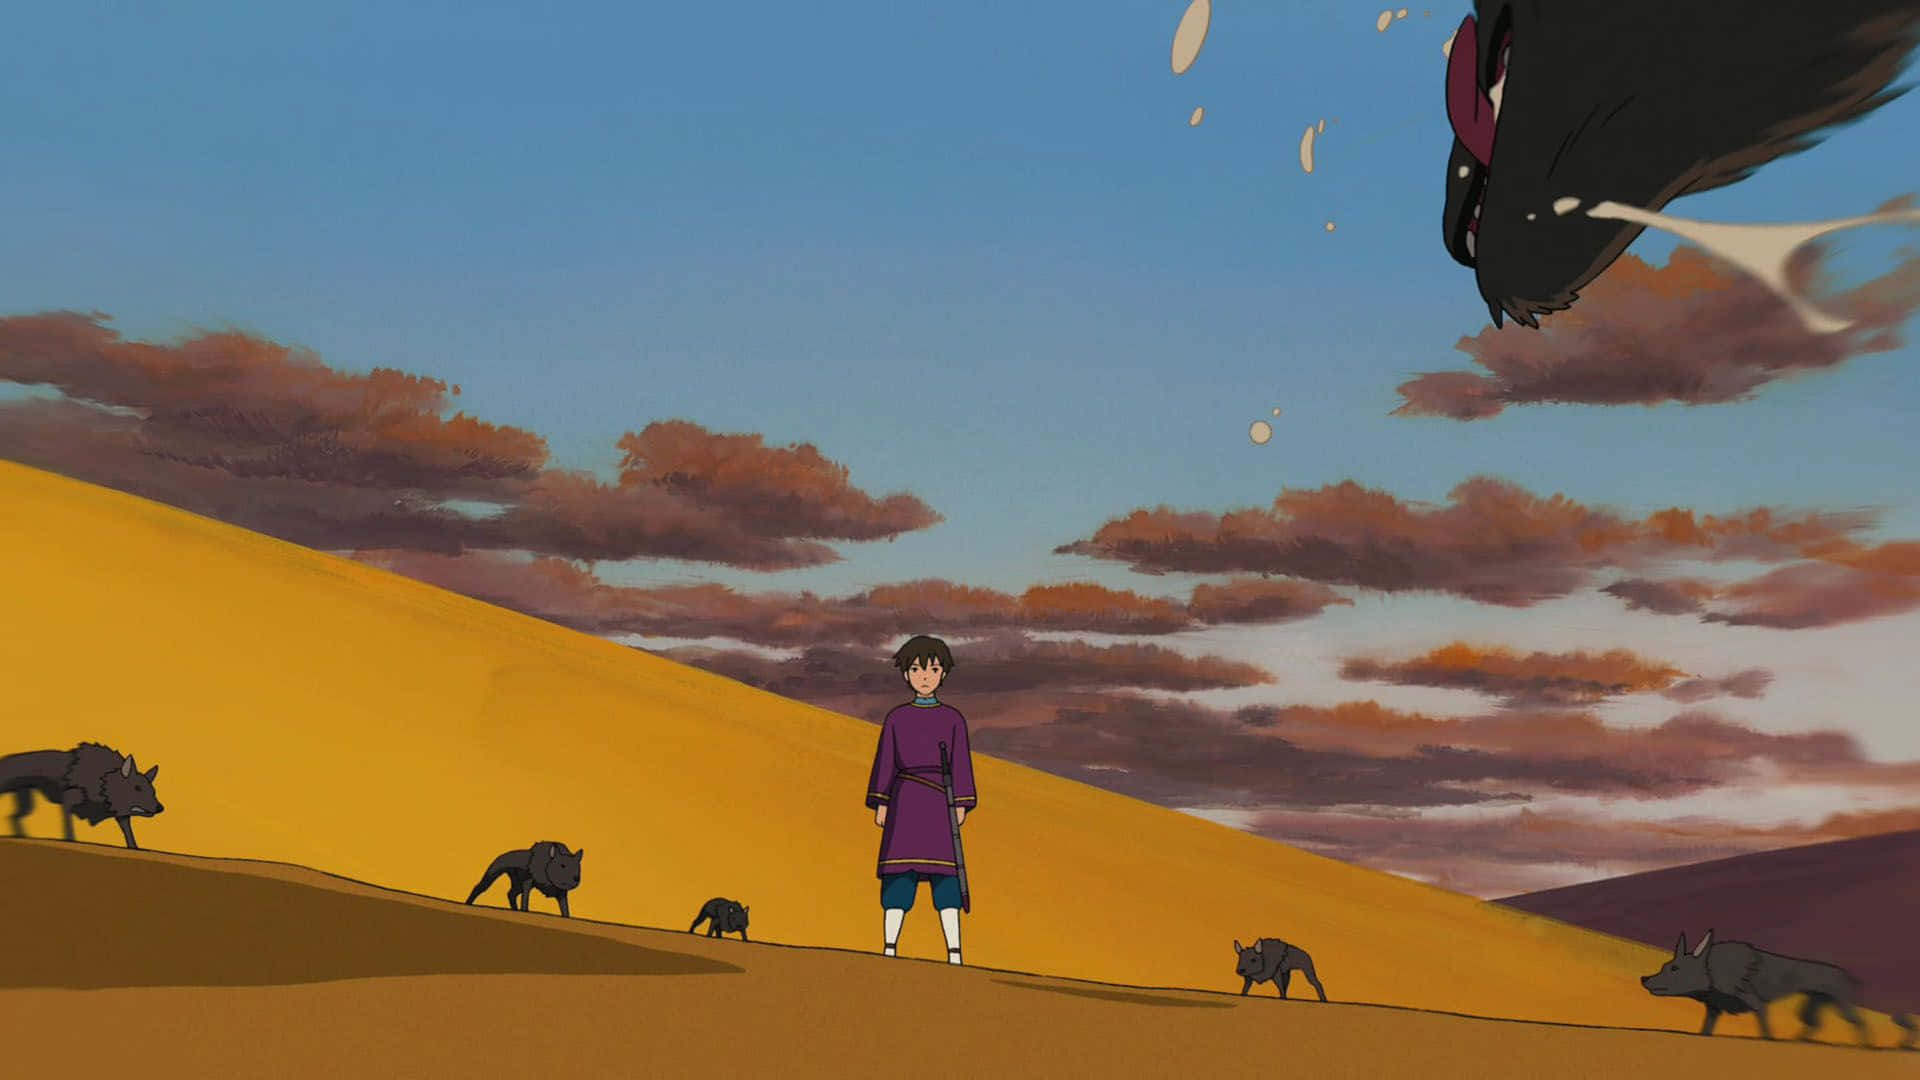 Ged, Prince Arren, and Therru in a scene from Tales from Earthsea Wallpaper